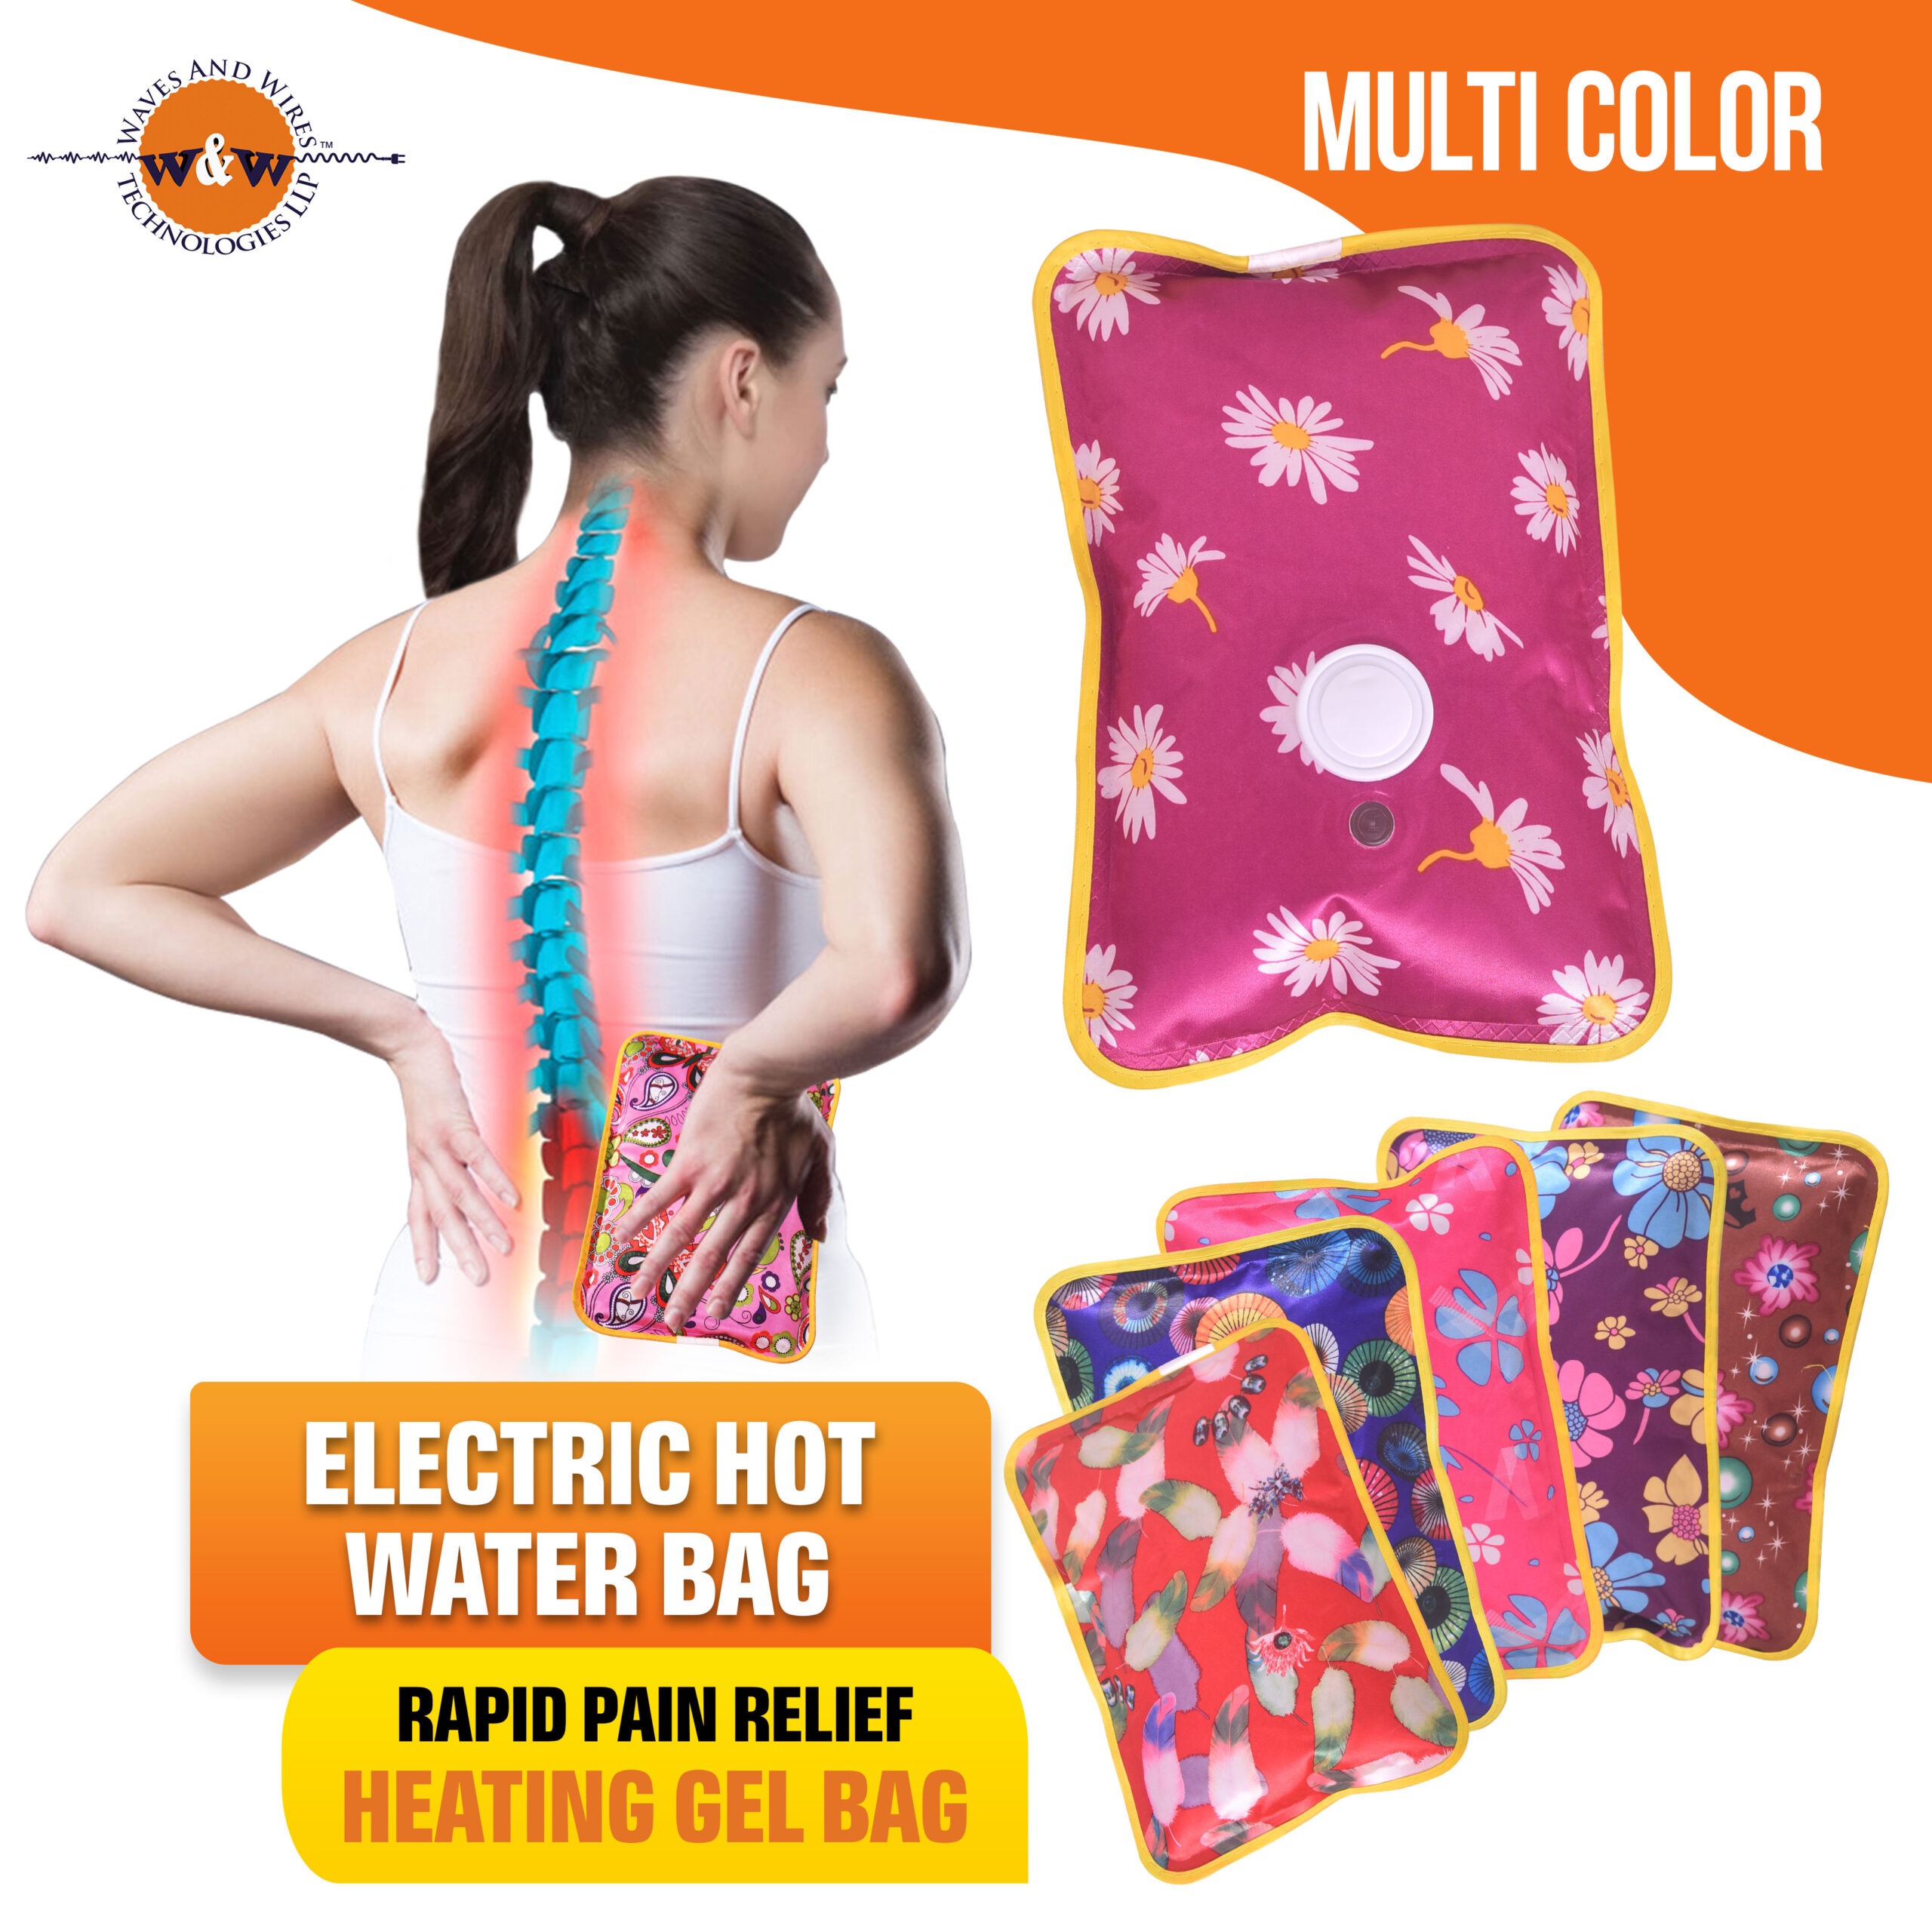 Electric Hot Water Bag, Hot Water Bags For Pain Relief, Electric Heating Bag